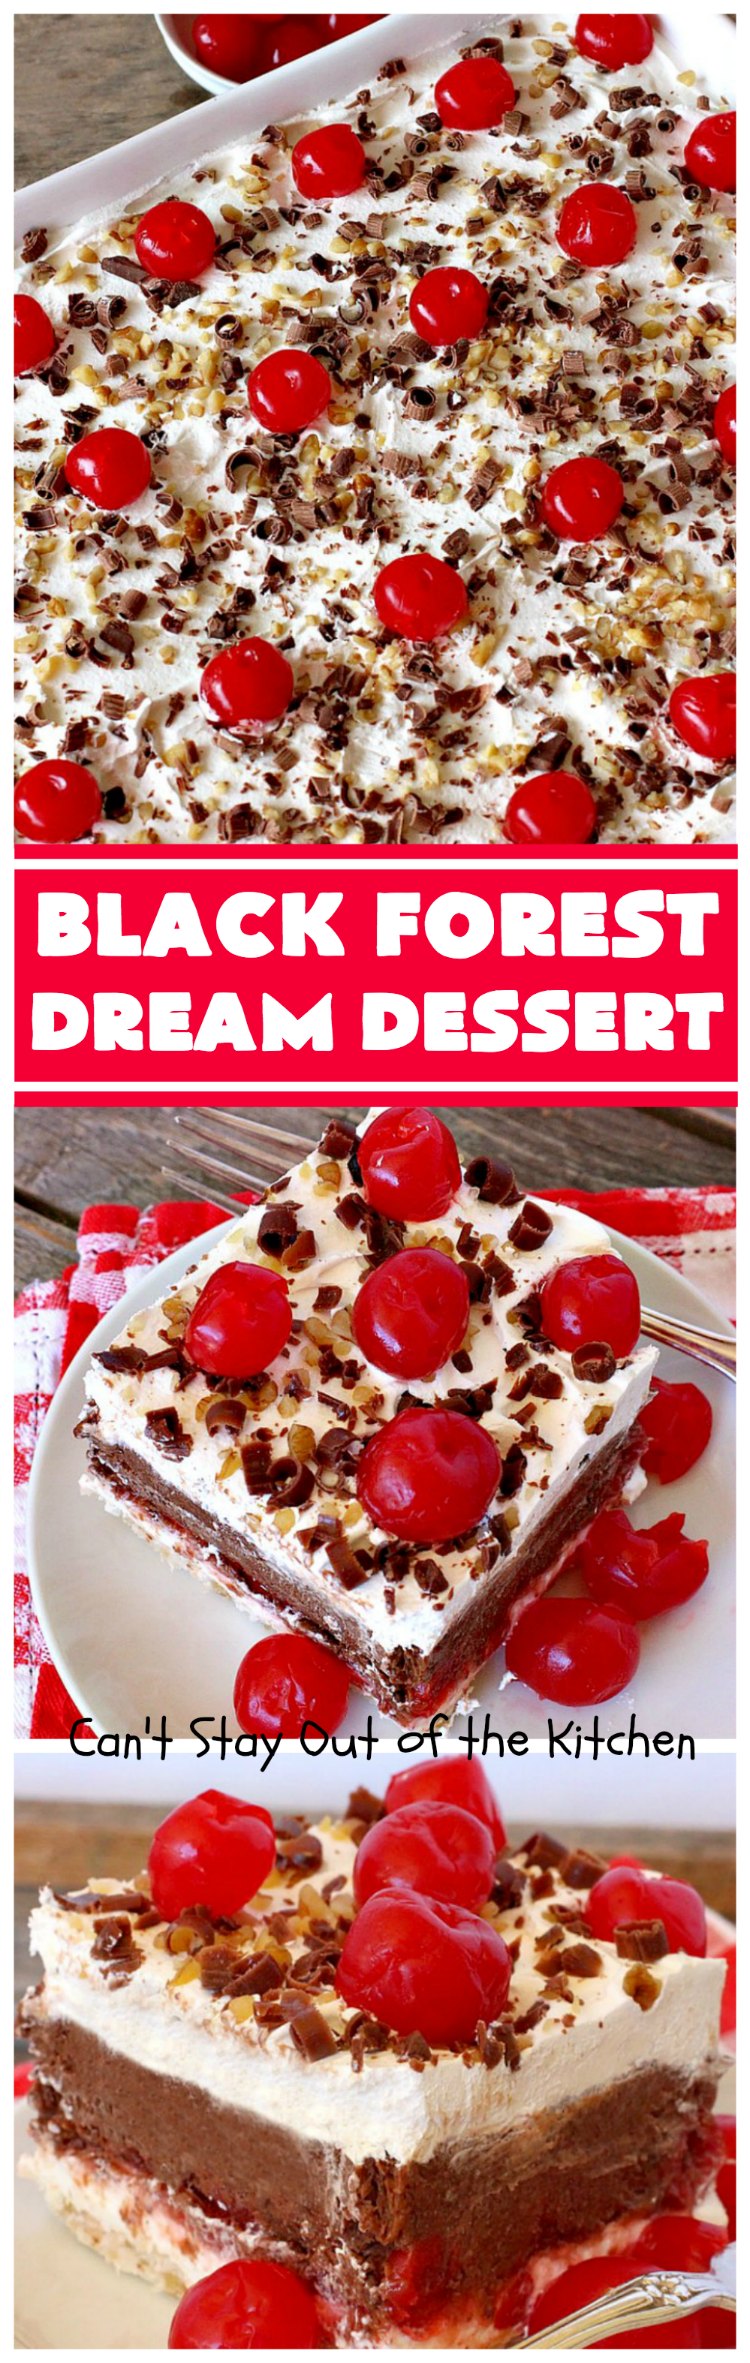 Black Forest Dream Dessert | Can't Stay Out of the Kitchen